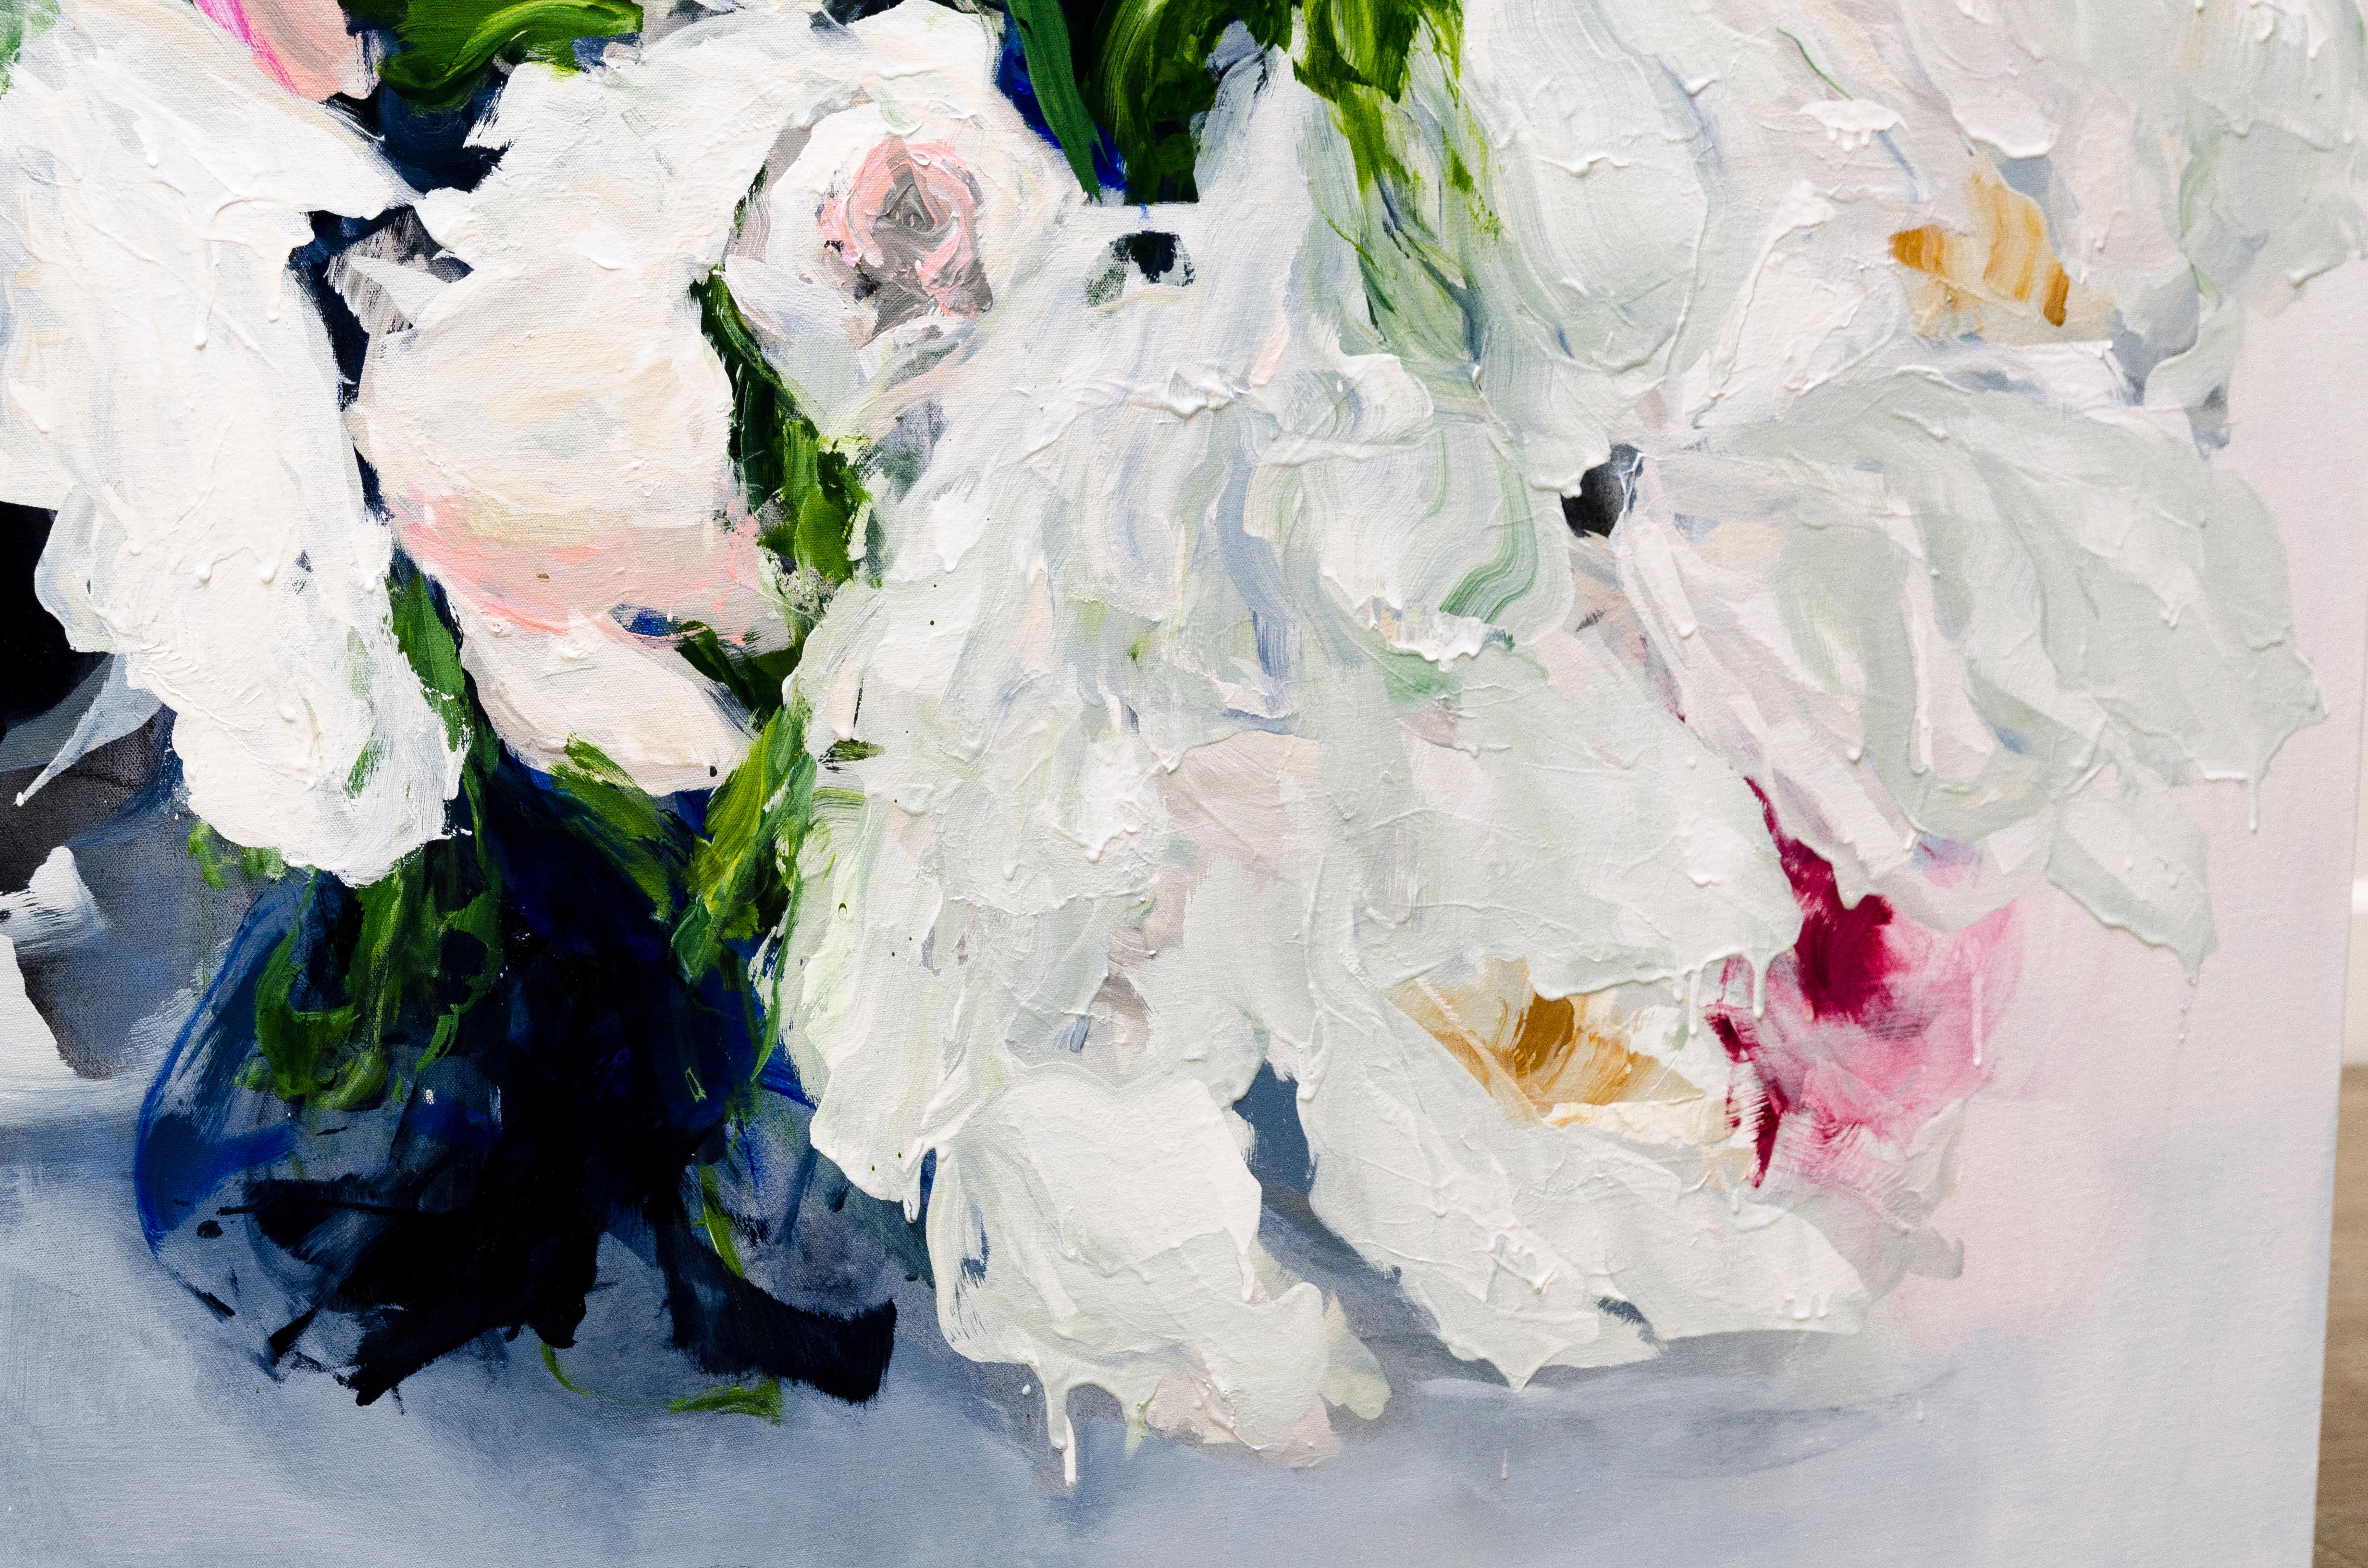 In 'Break into Blossom #2' by Ramona Stelzer, the viewer is transported into the heart of a fragile bouquet of white roses. Stelzer's profound artistic attention is fixated on the fleeting beauty of these blooms, skillfully breathing life into the